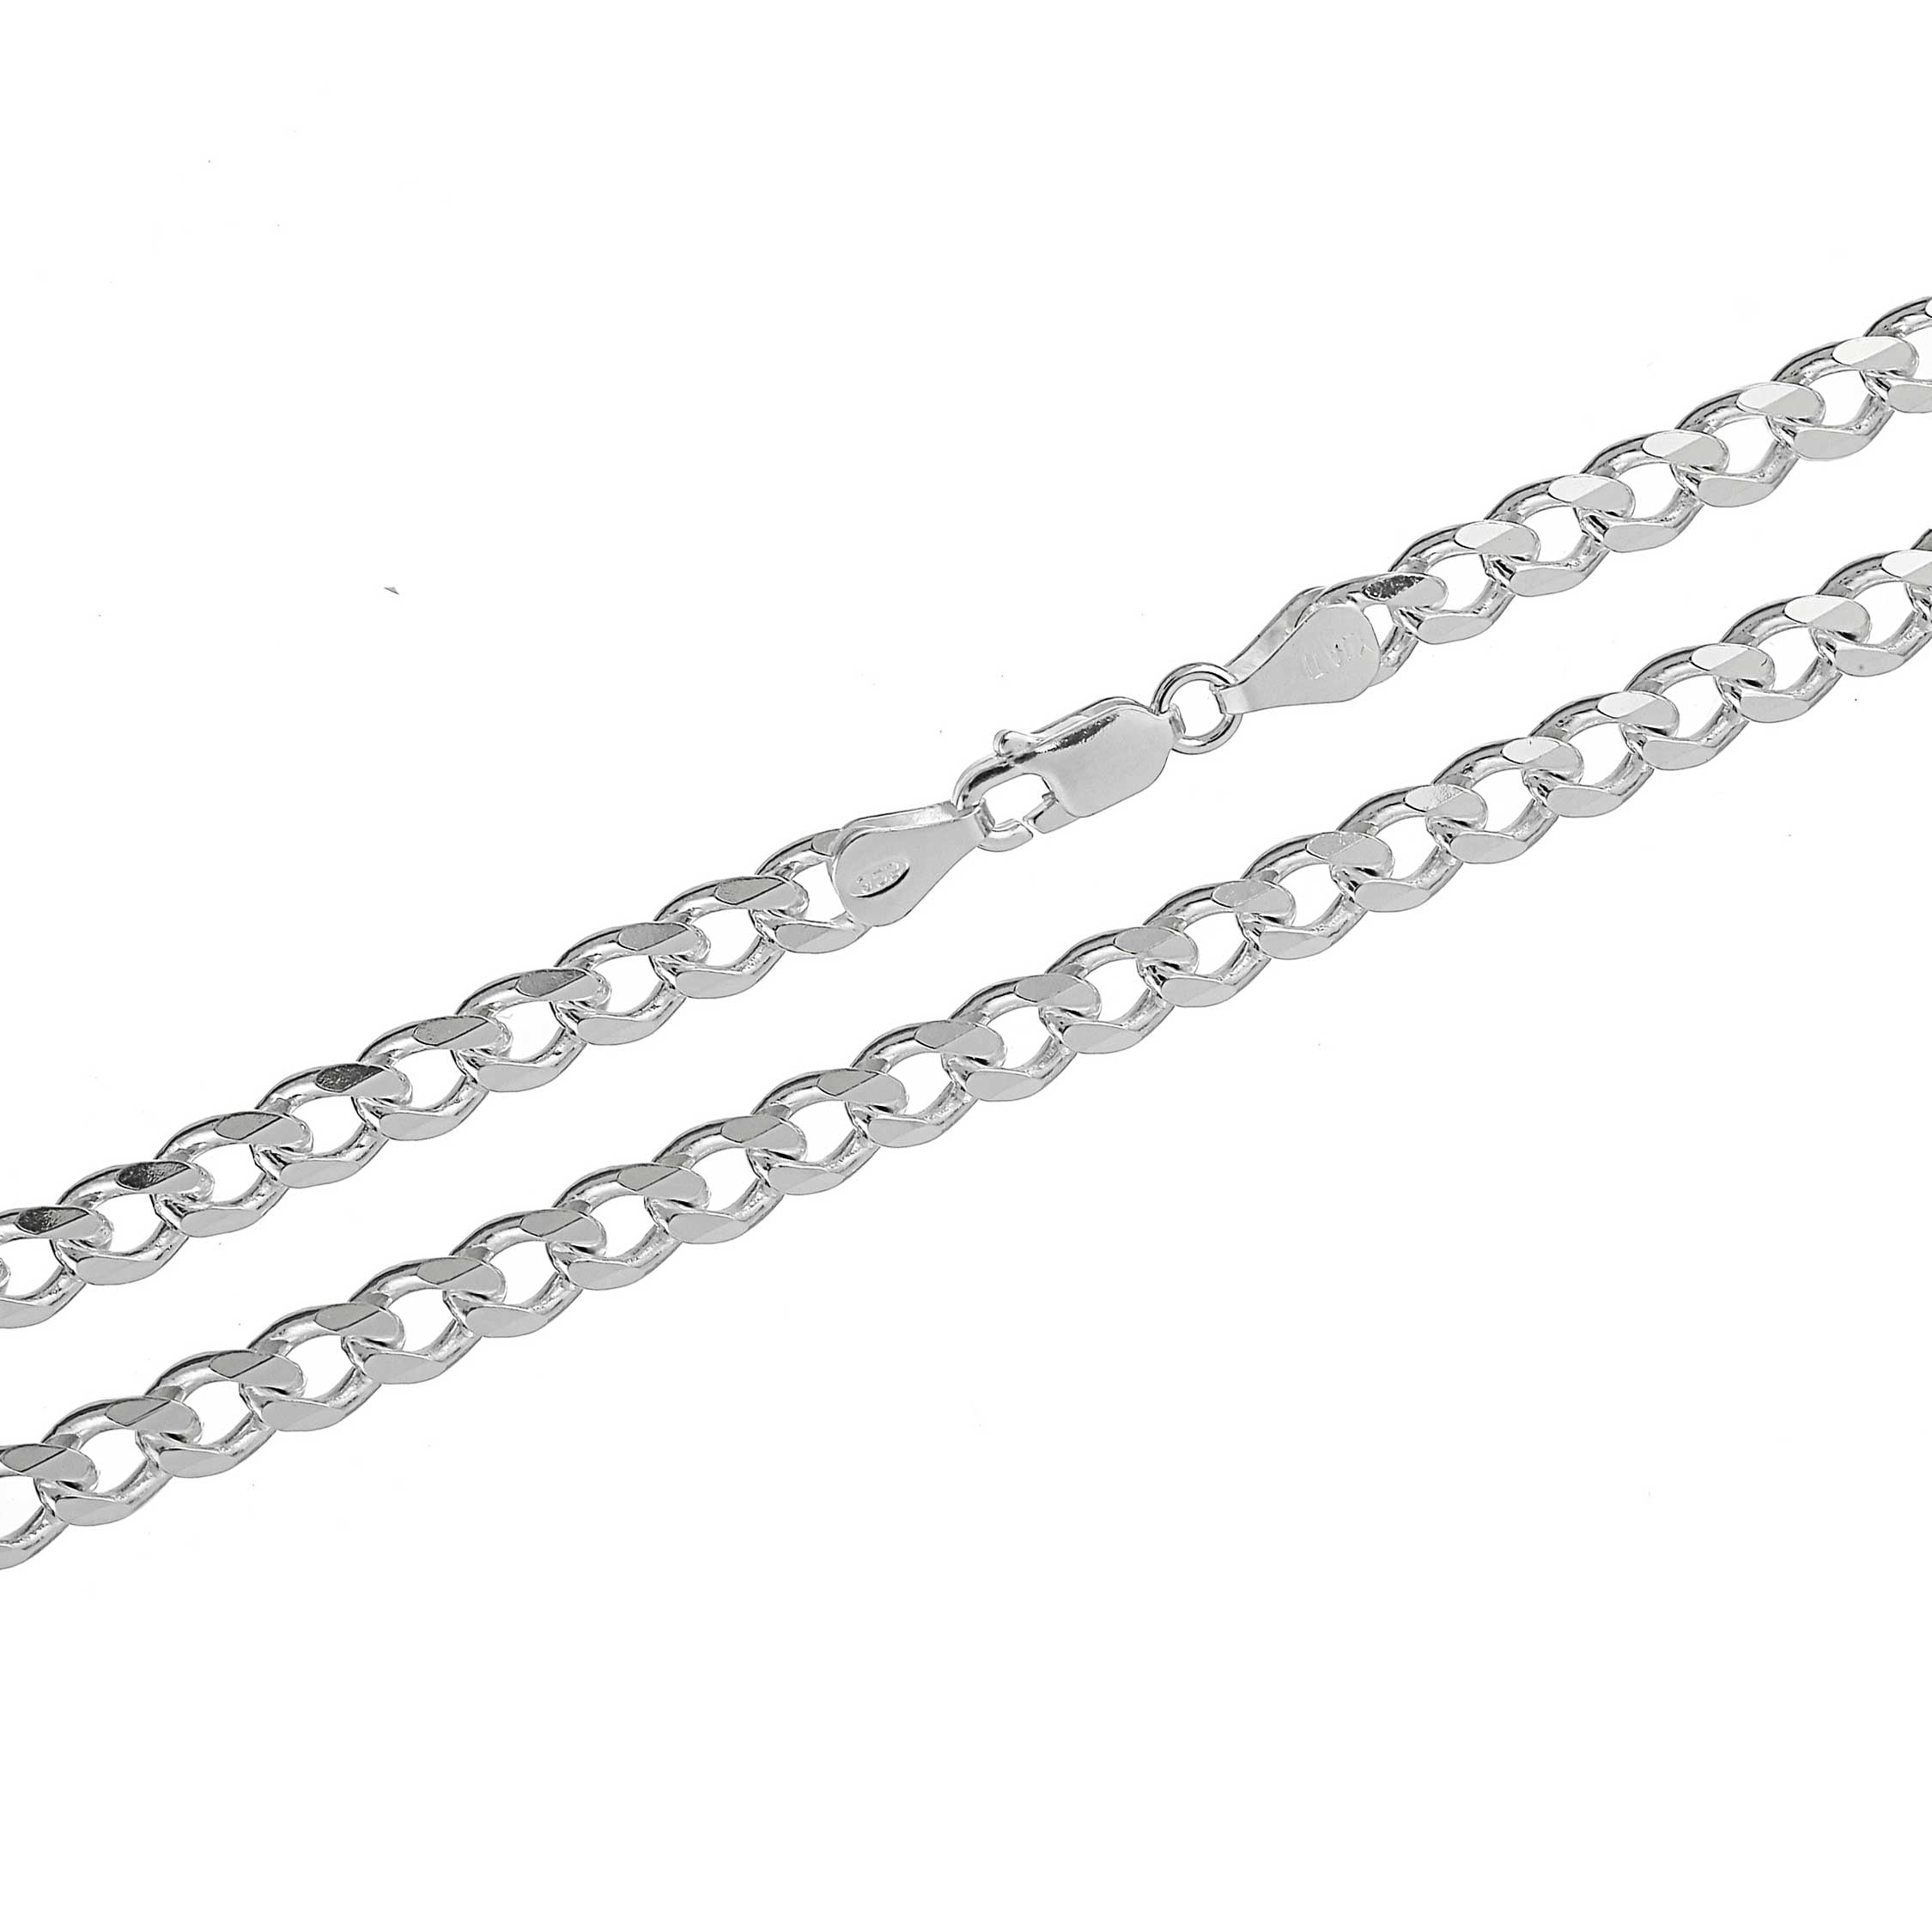 SOLID .925 STERLING SILVER Fancy Designer CURB LINK CHAIN 18" SPECIAL SALE 